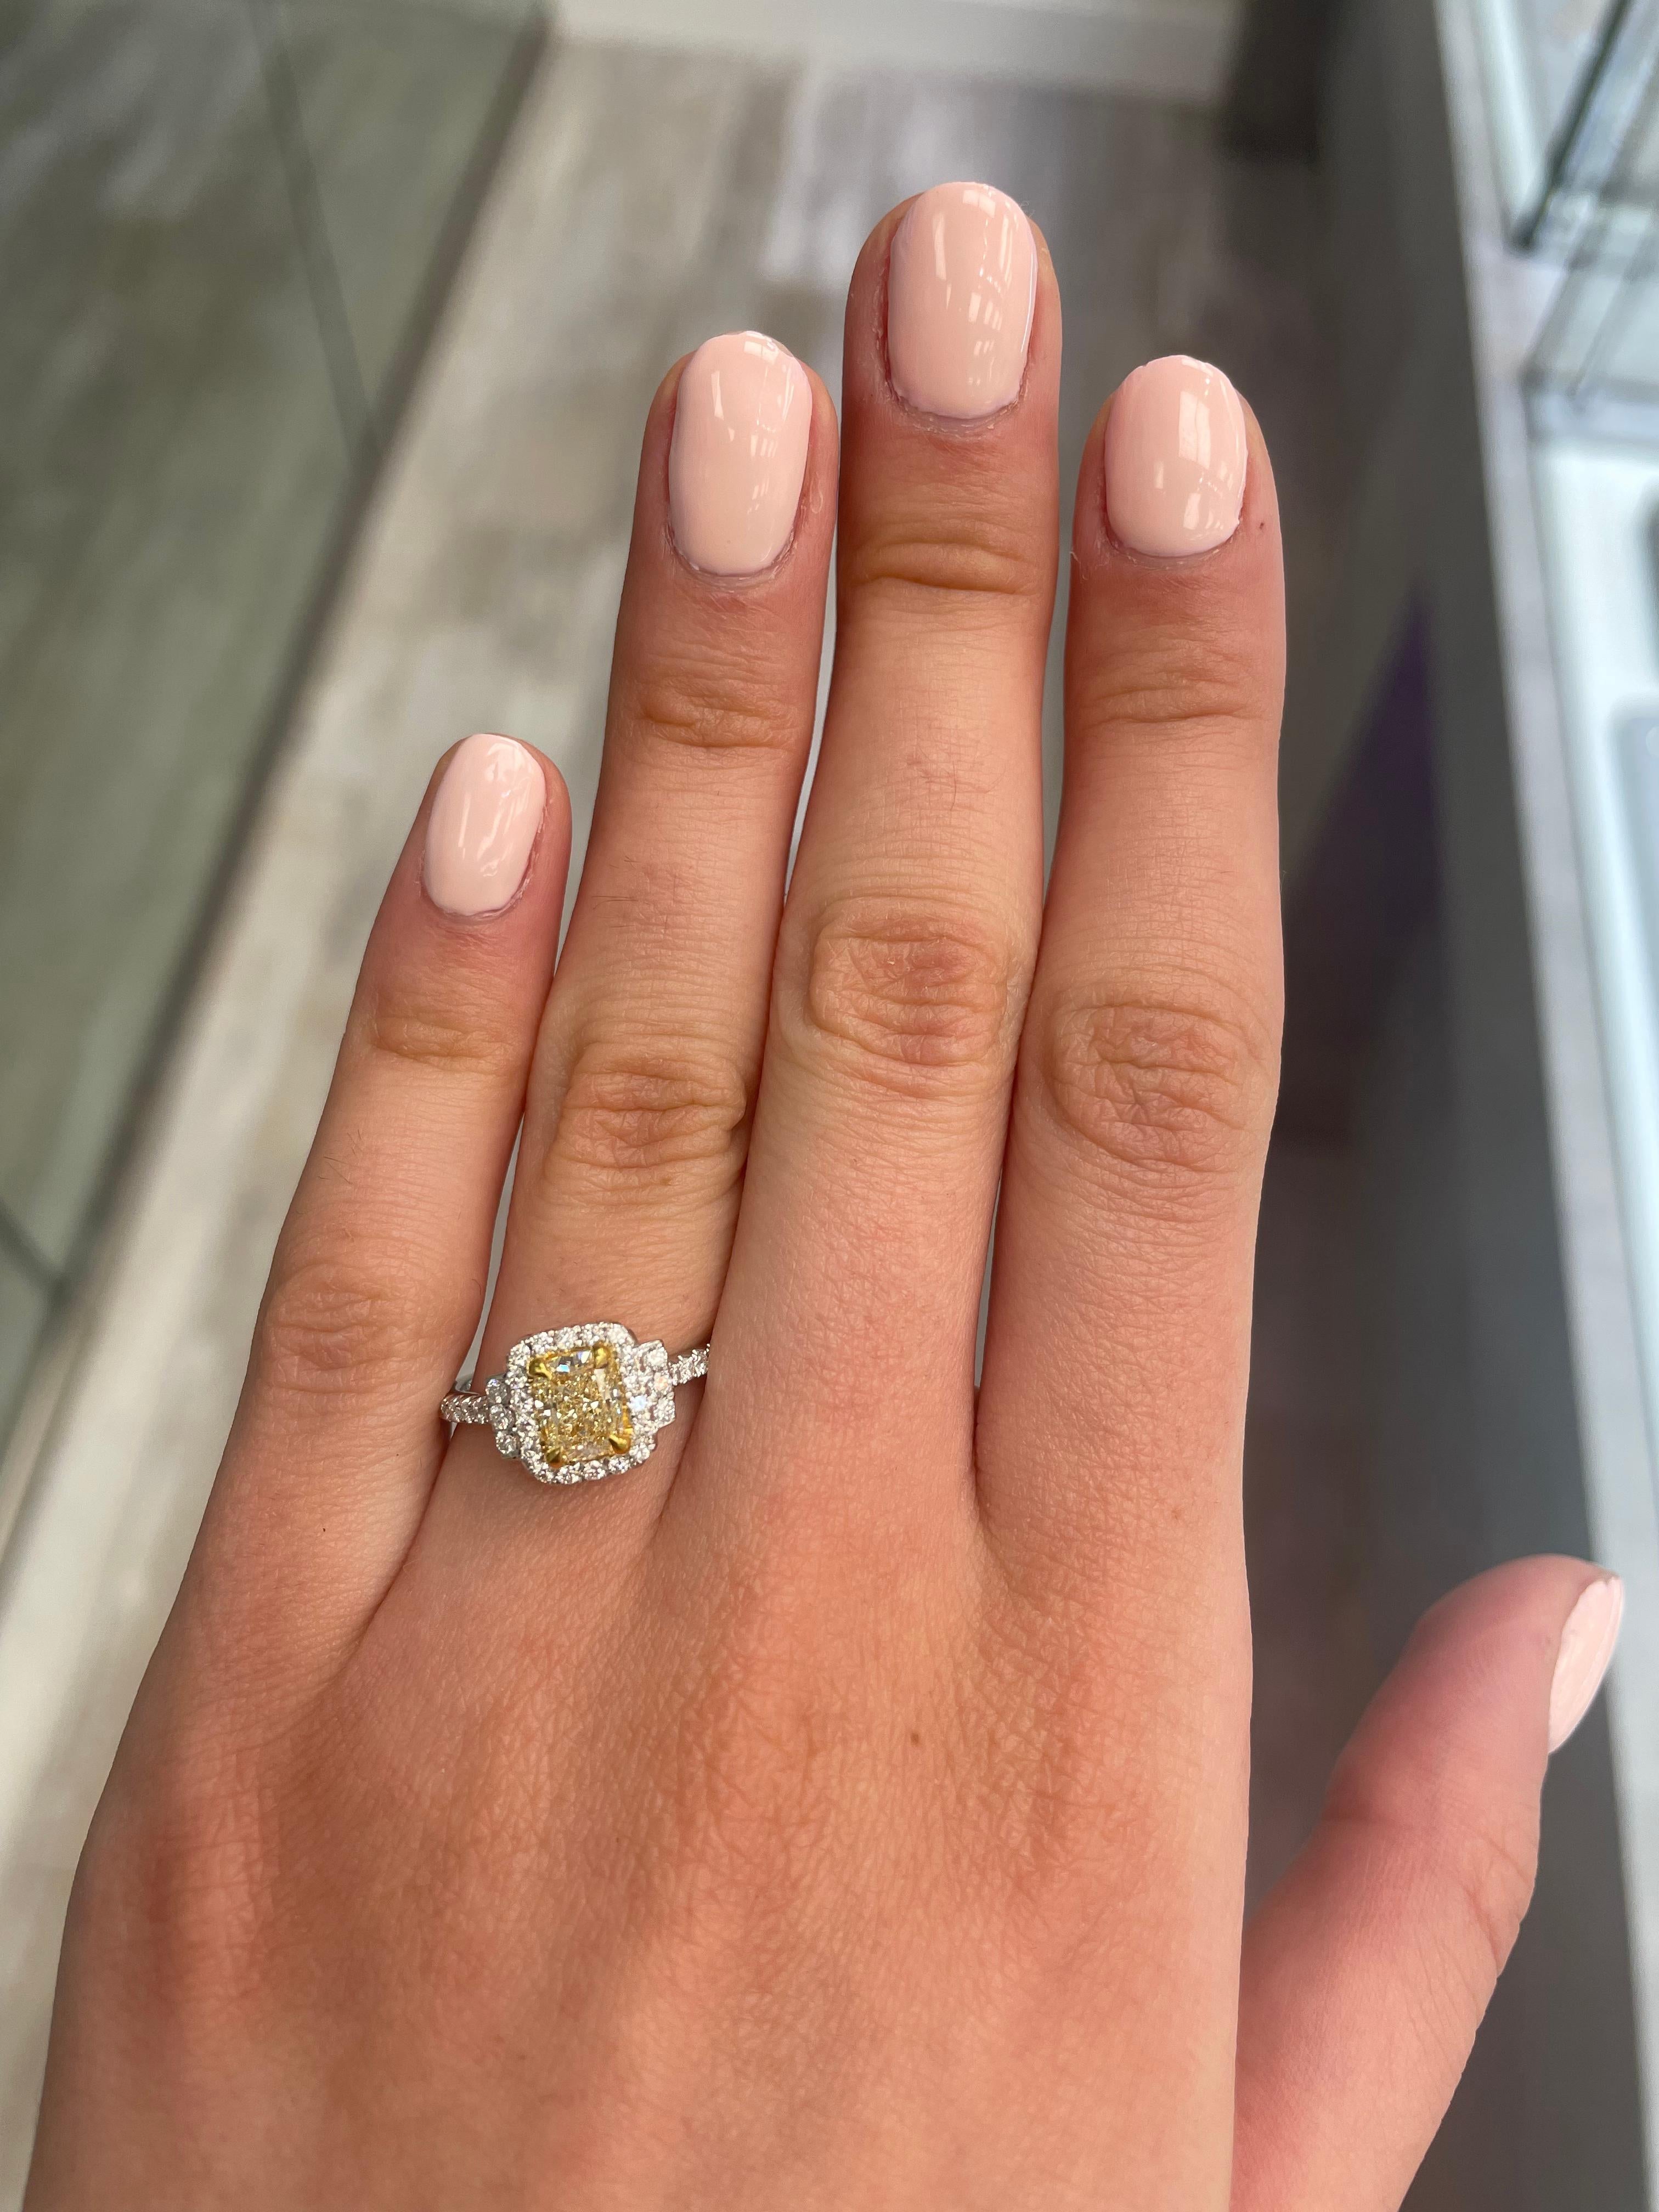 Stunning modern EGL certified yellow diamond with halo ring, two-tone 18k yellow and white gold. By Alexander Beverly Hills
1.39 carats total diamond weight.
1.01 carat cushion cut Fancy Yellow color and VS2 clarity diamond, EGL graded. Complimented